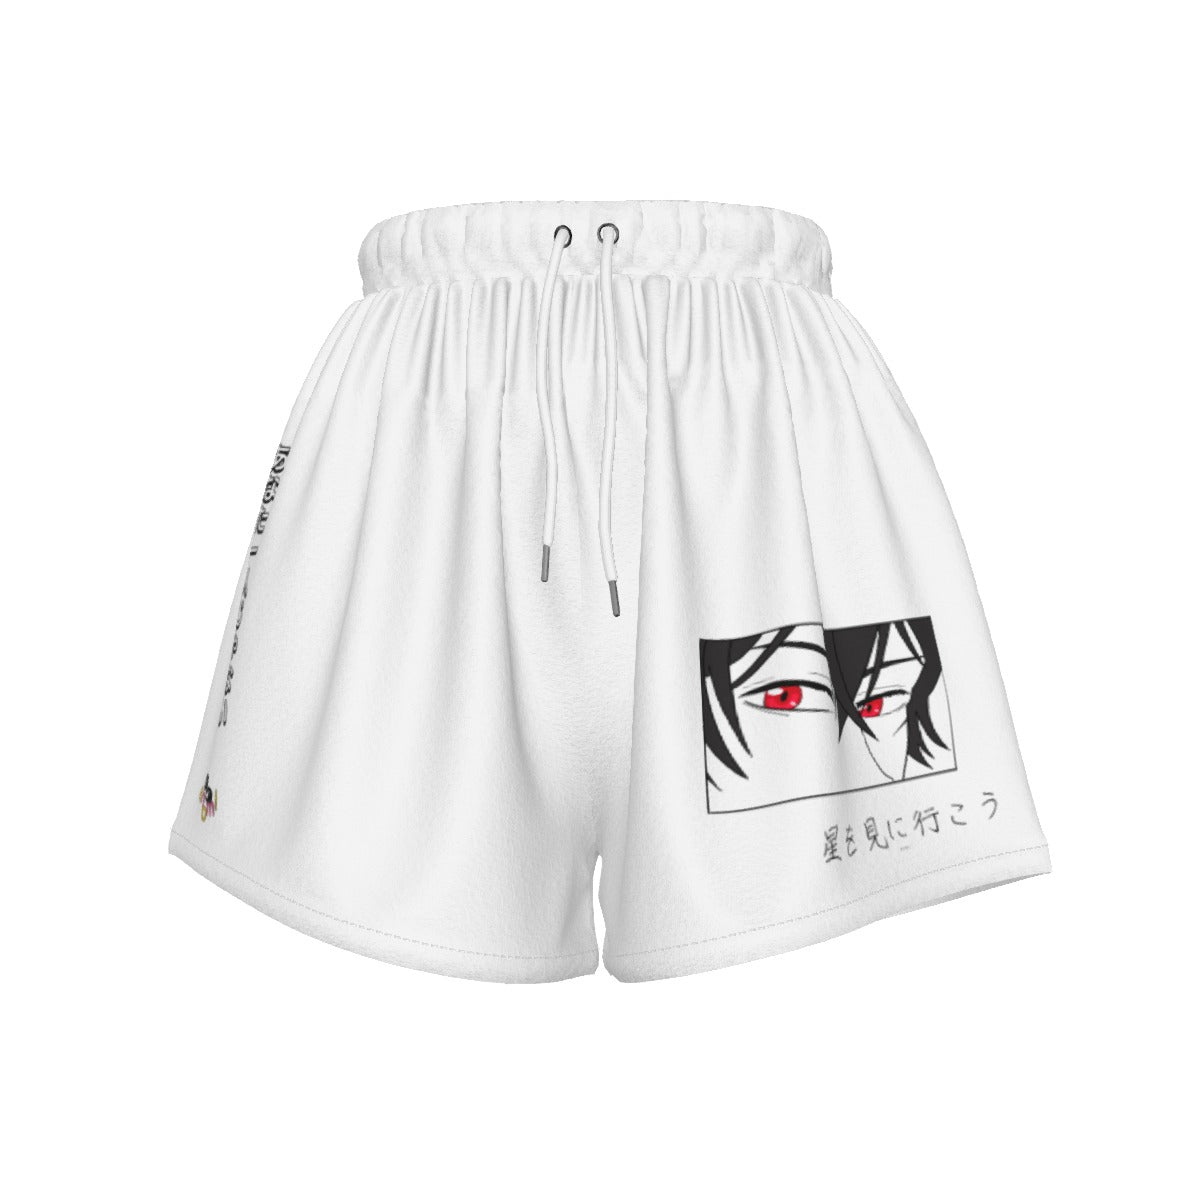 "YOU'RE NOT ALONE" Sports Shorts